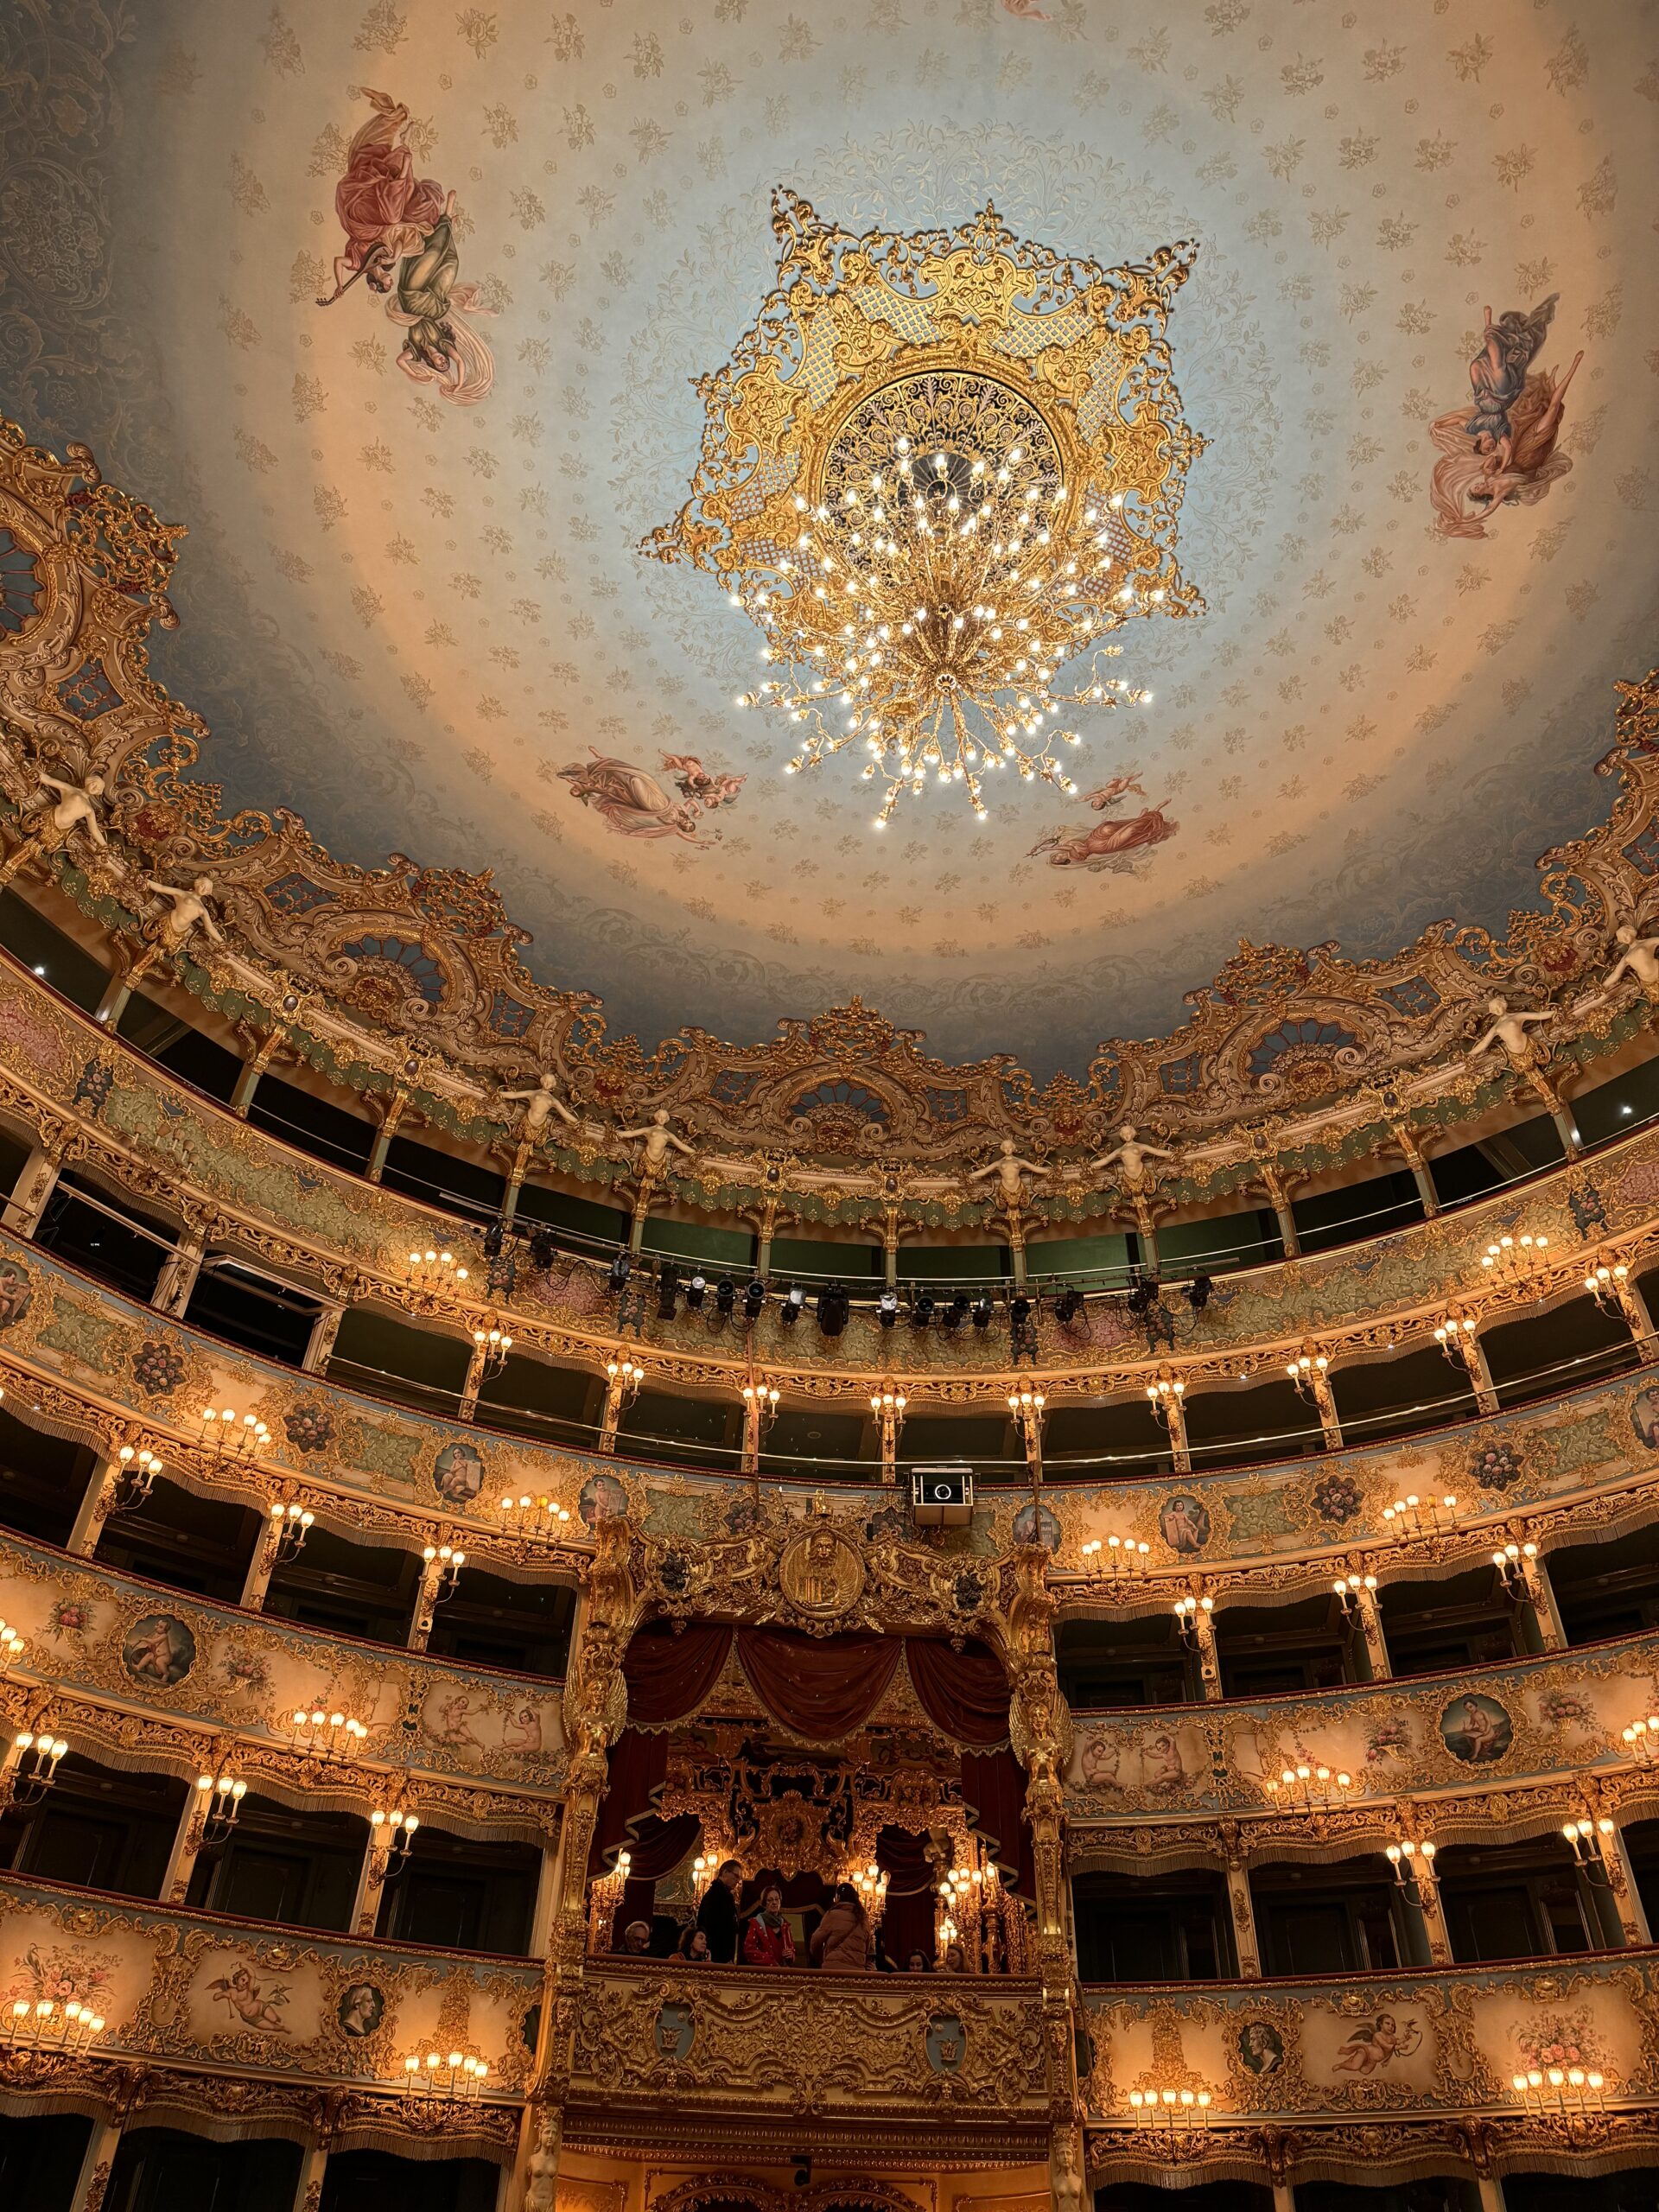 Today I give you Teatro La Fenice